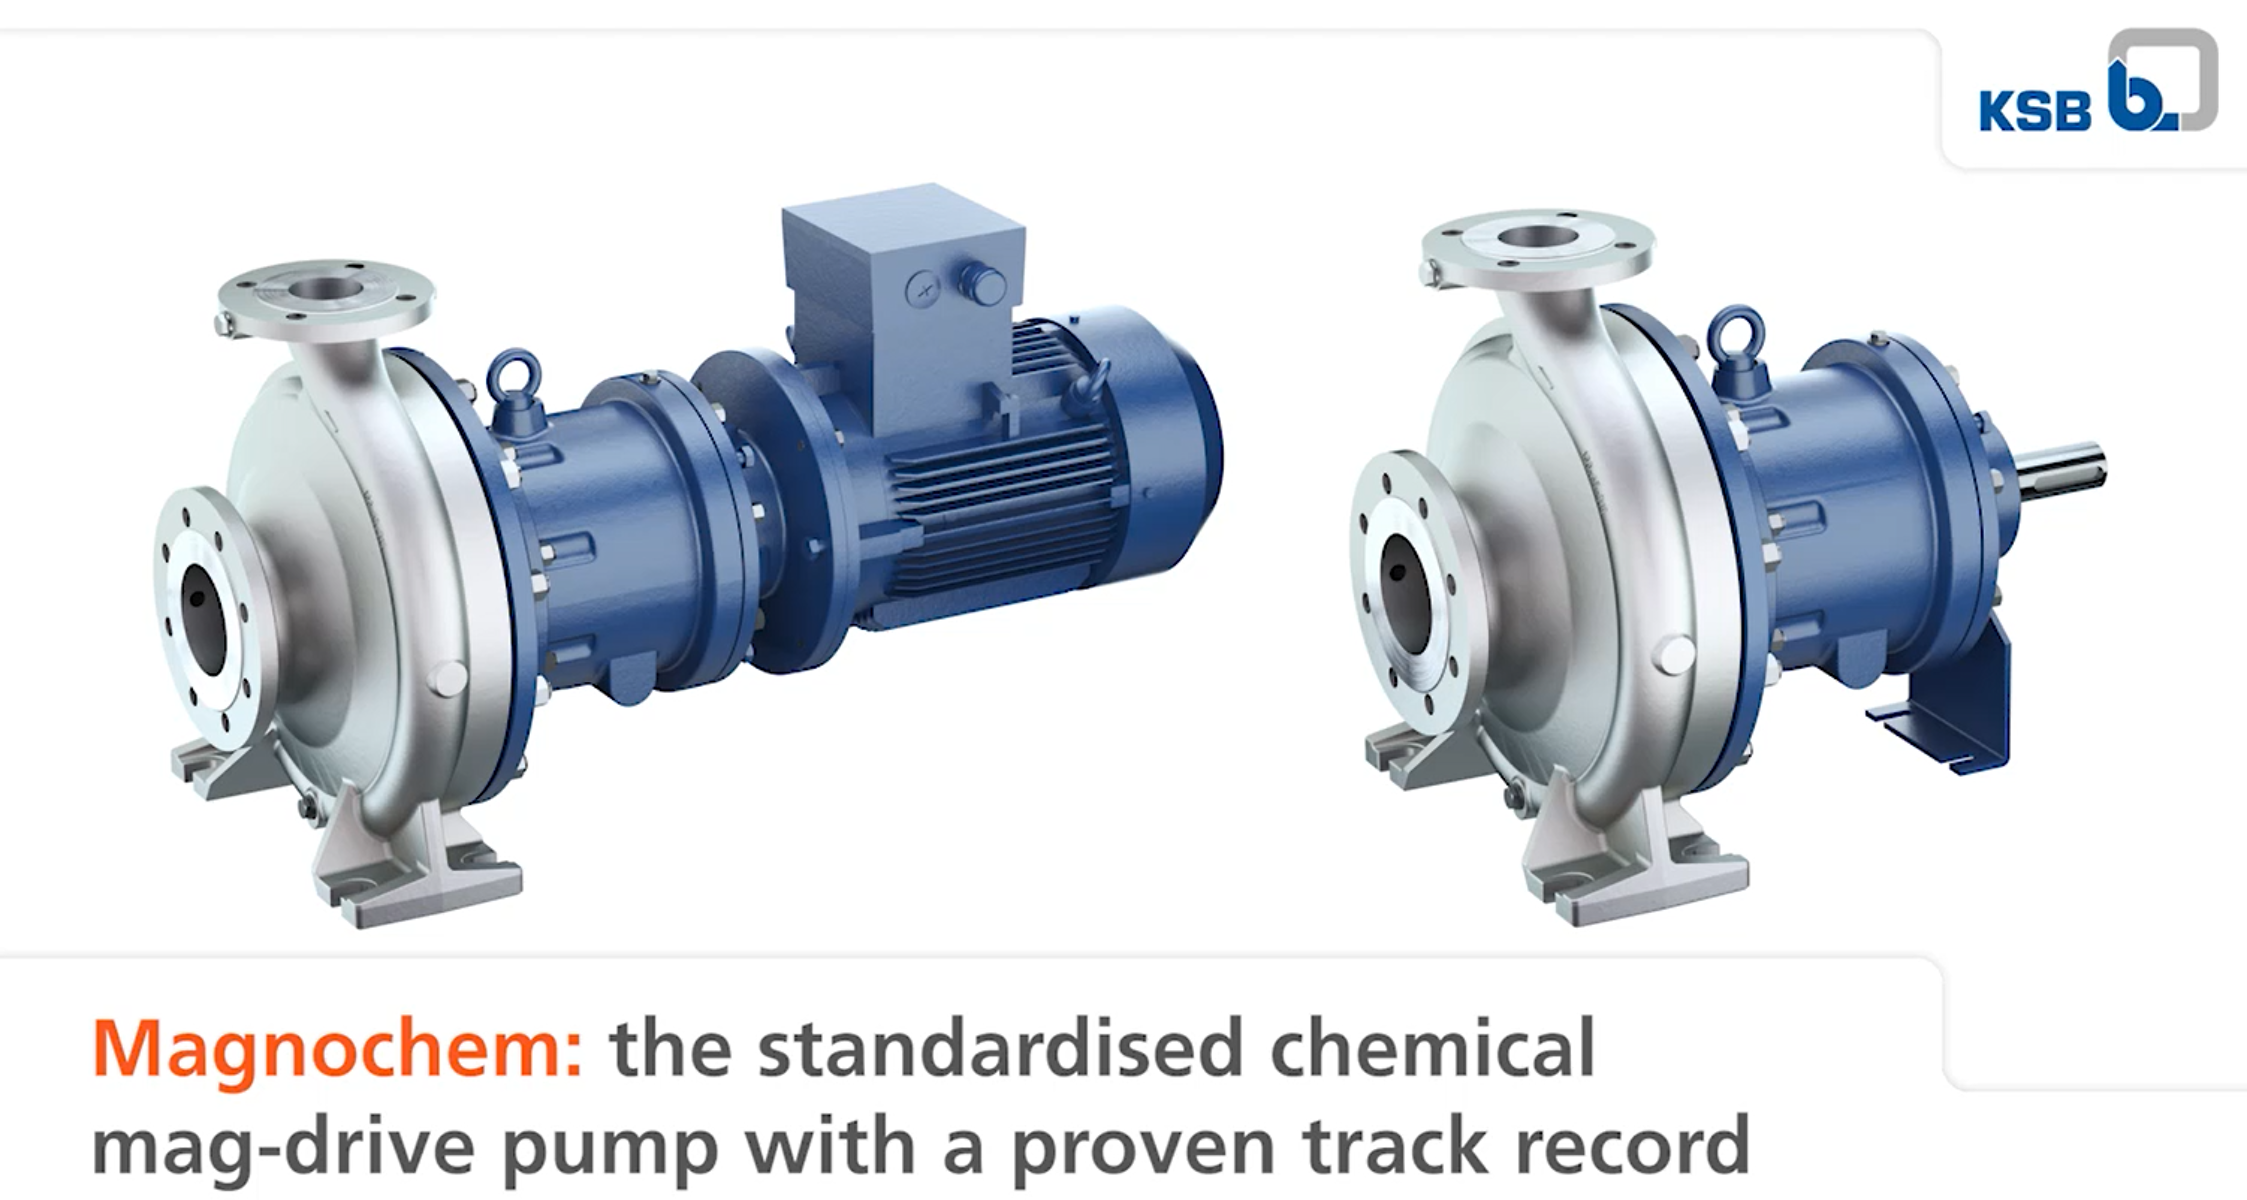 Magnochem: the standardised chemical mag-drive pump with a proven track record  - now available for hotter fluids and even safer